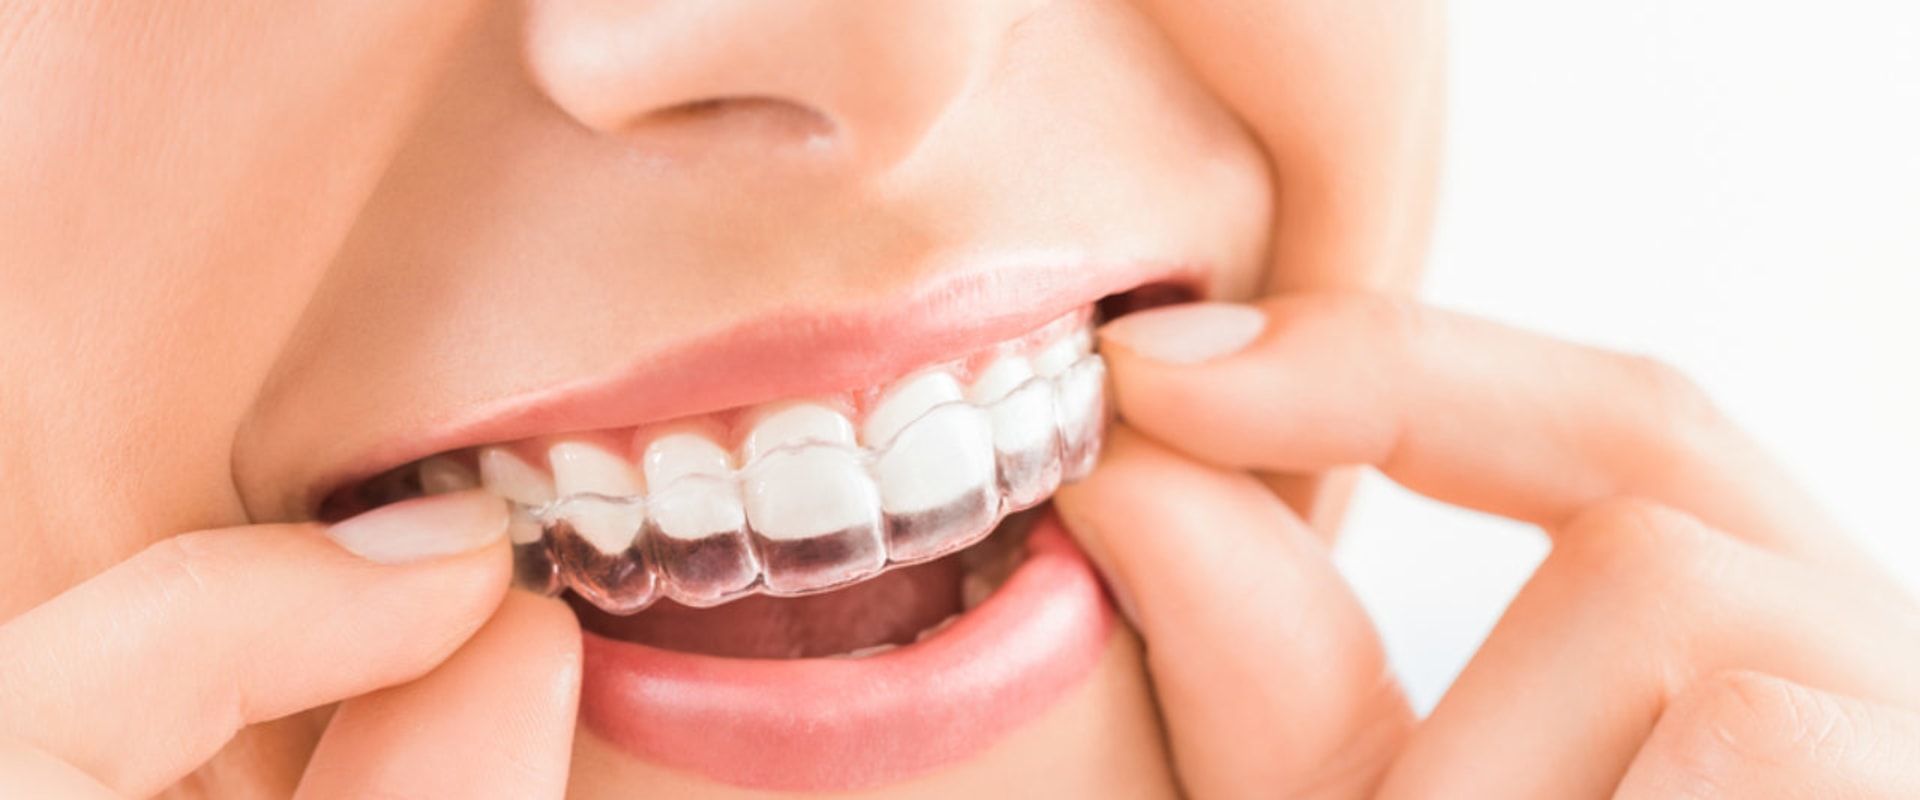 Will Invisalign Affect My Speech? - A Comprehensive Guide